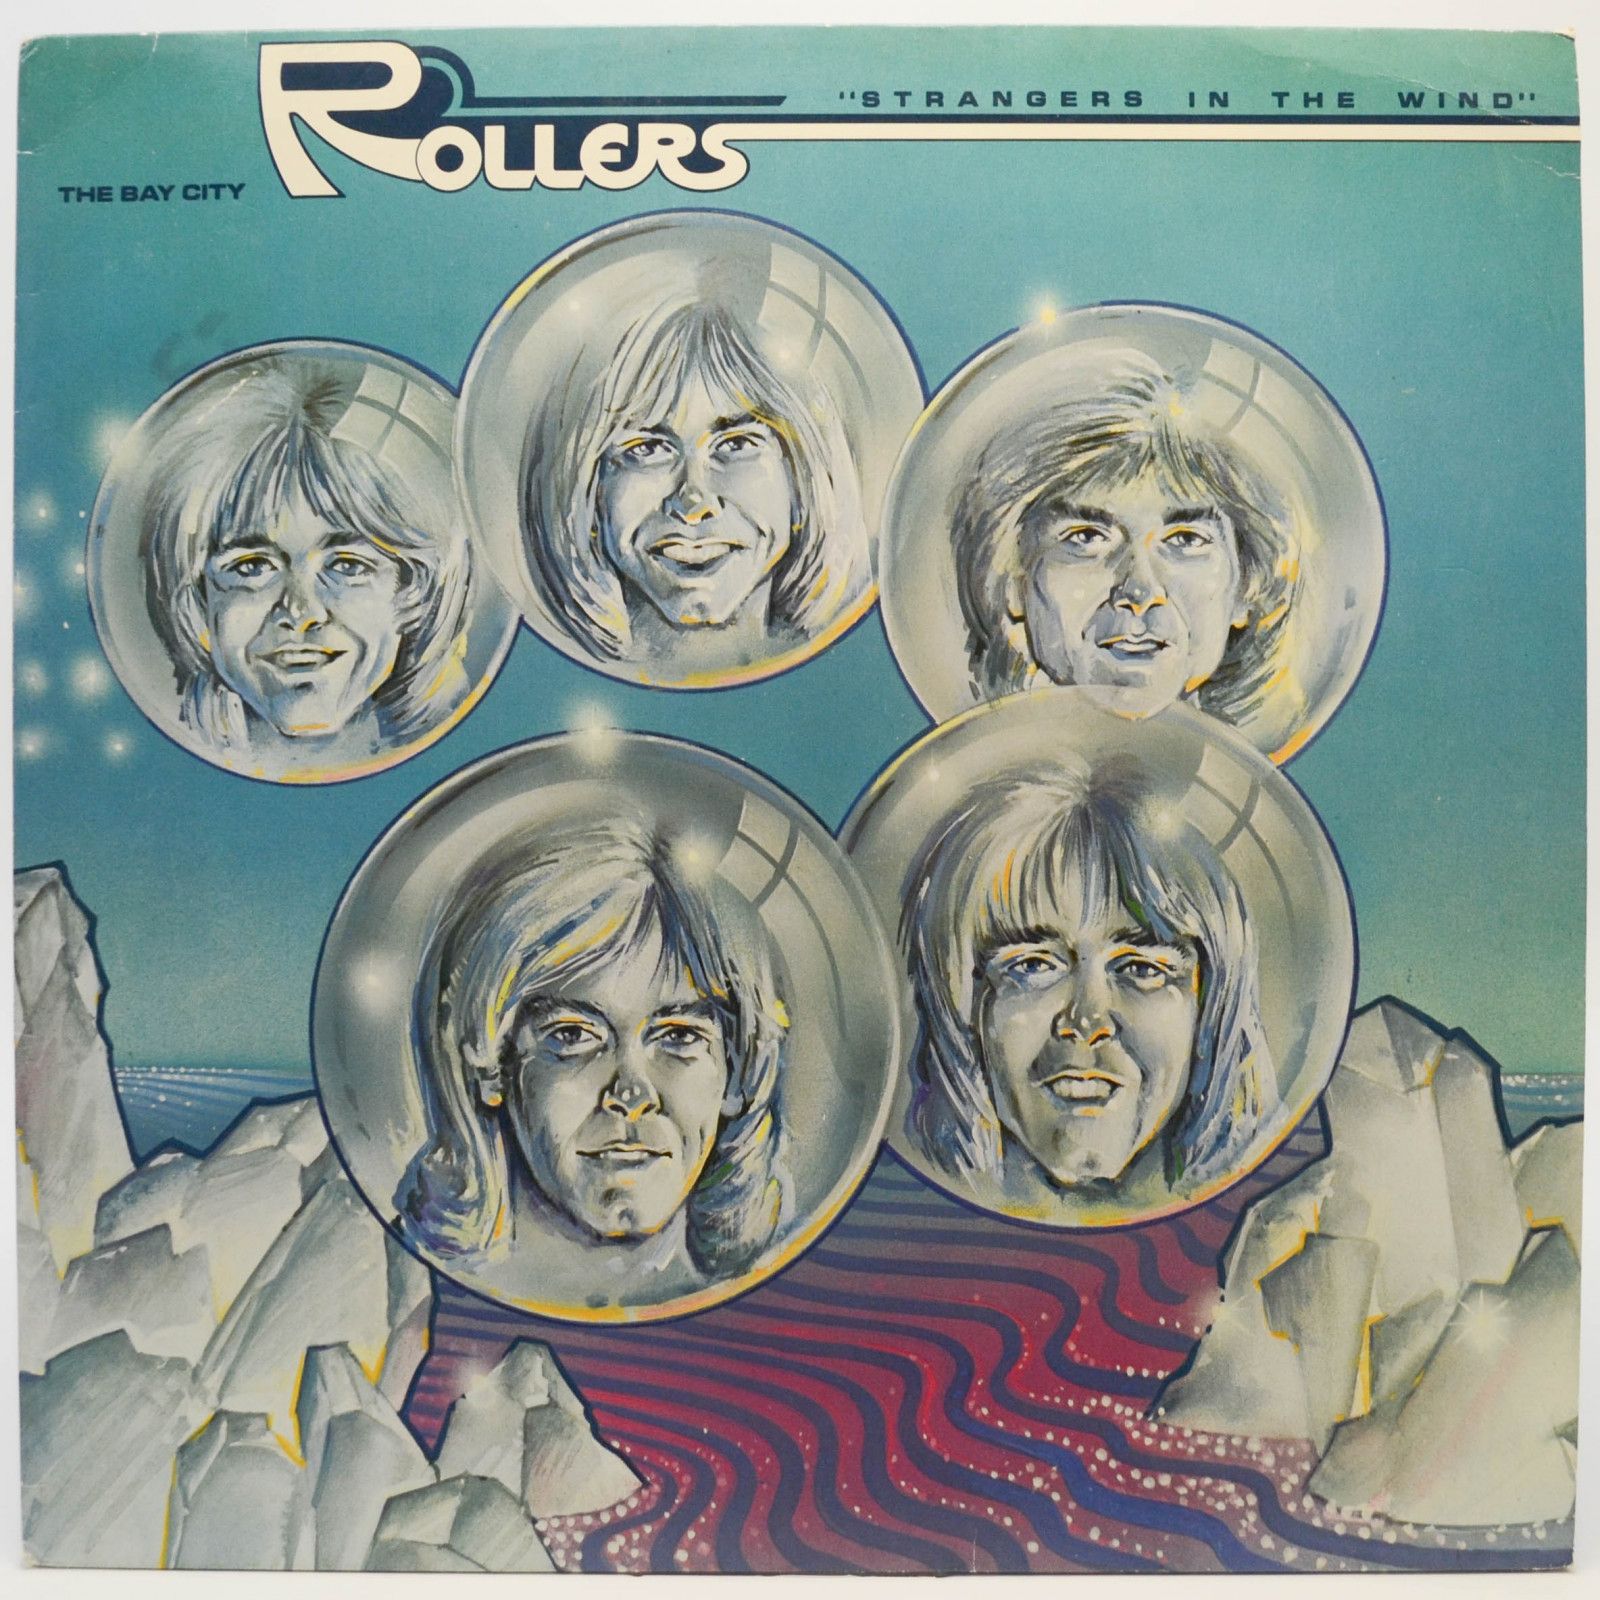 Bay City Rollers — Strangers In The Wind, 1978